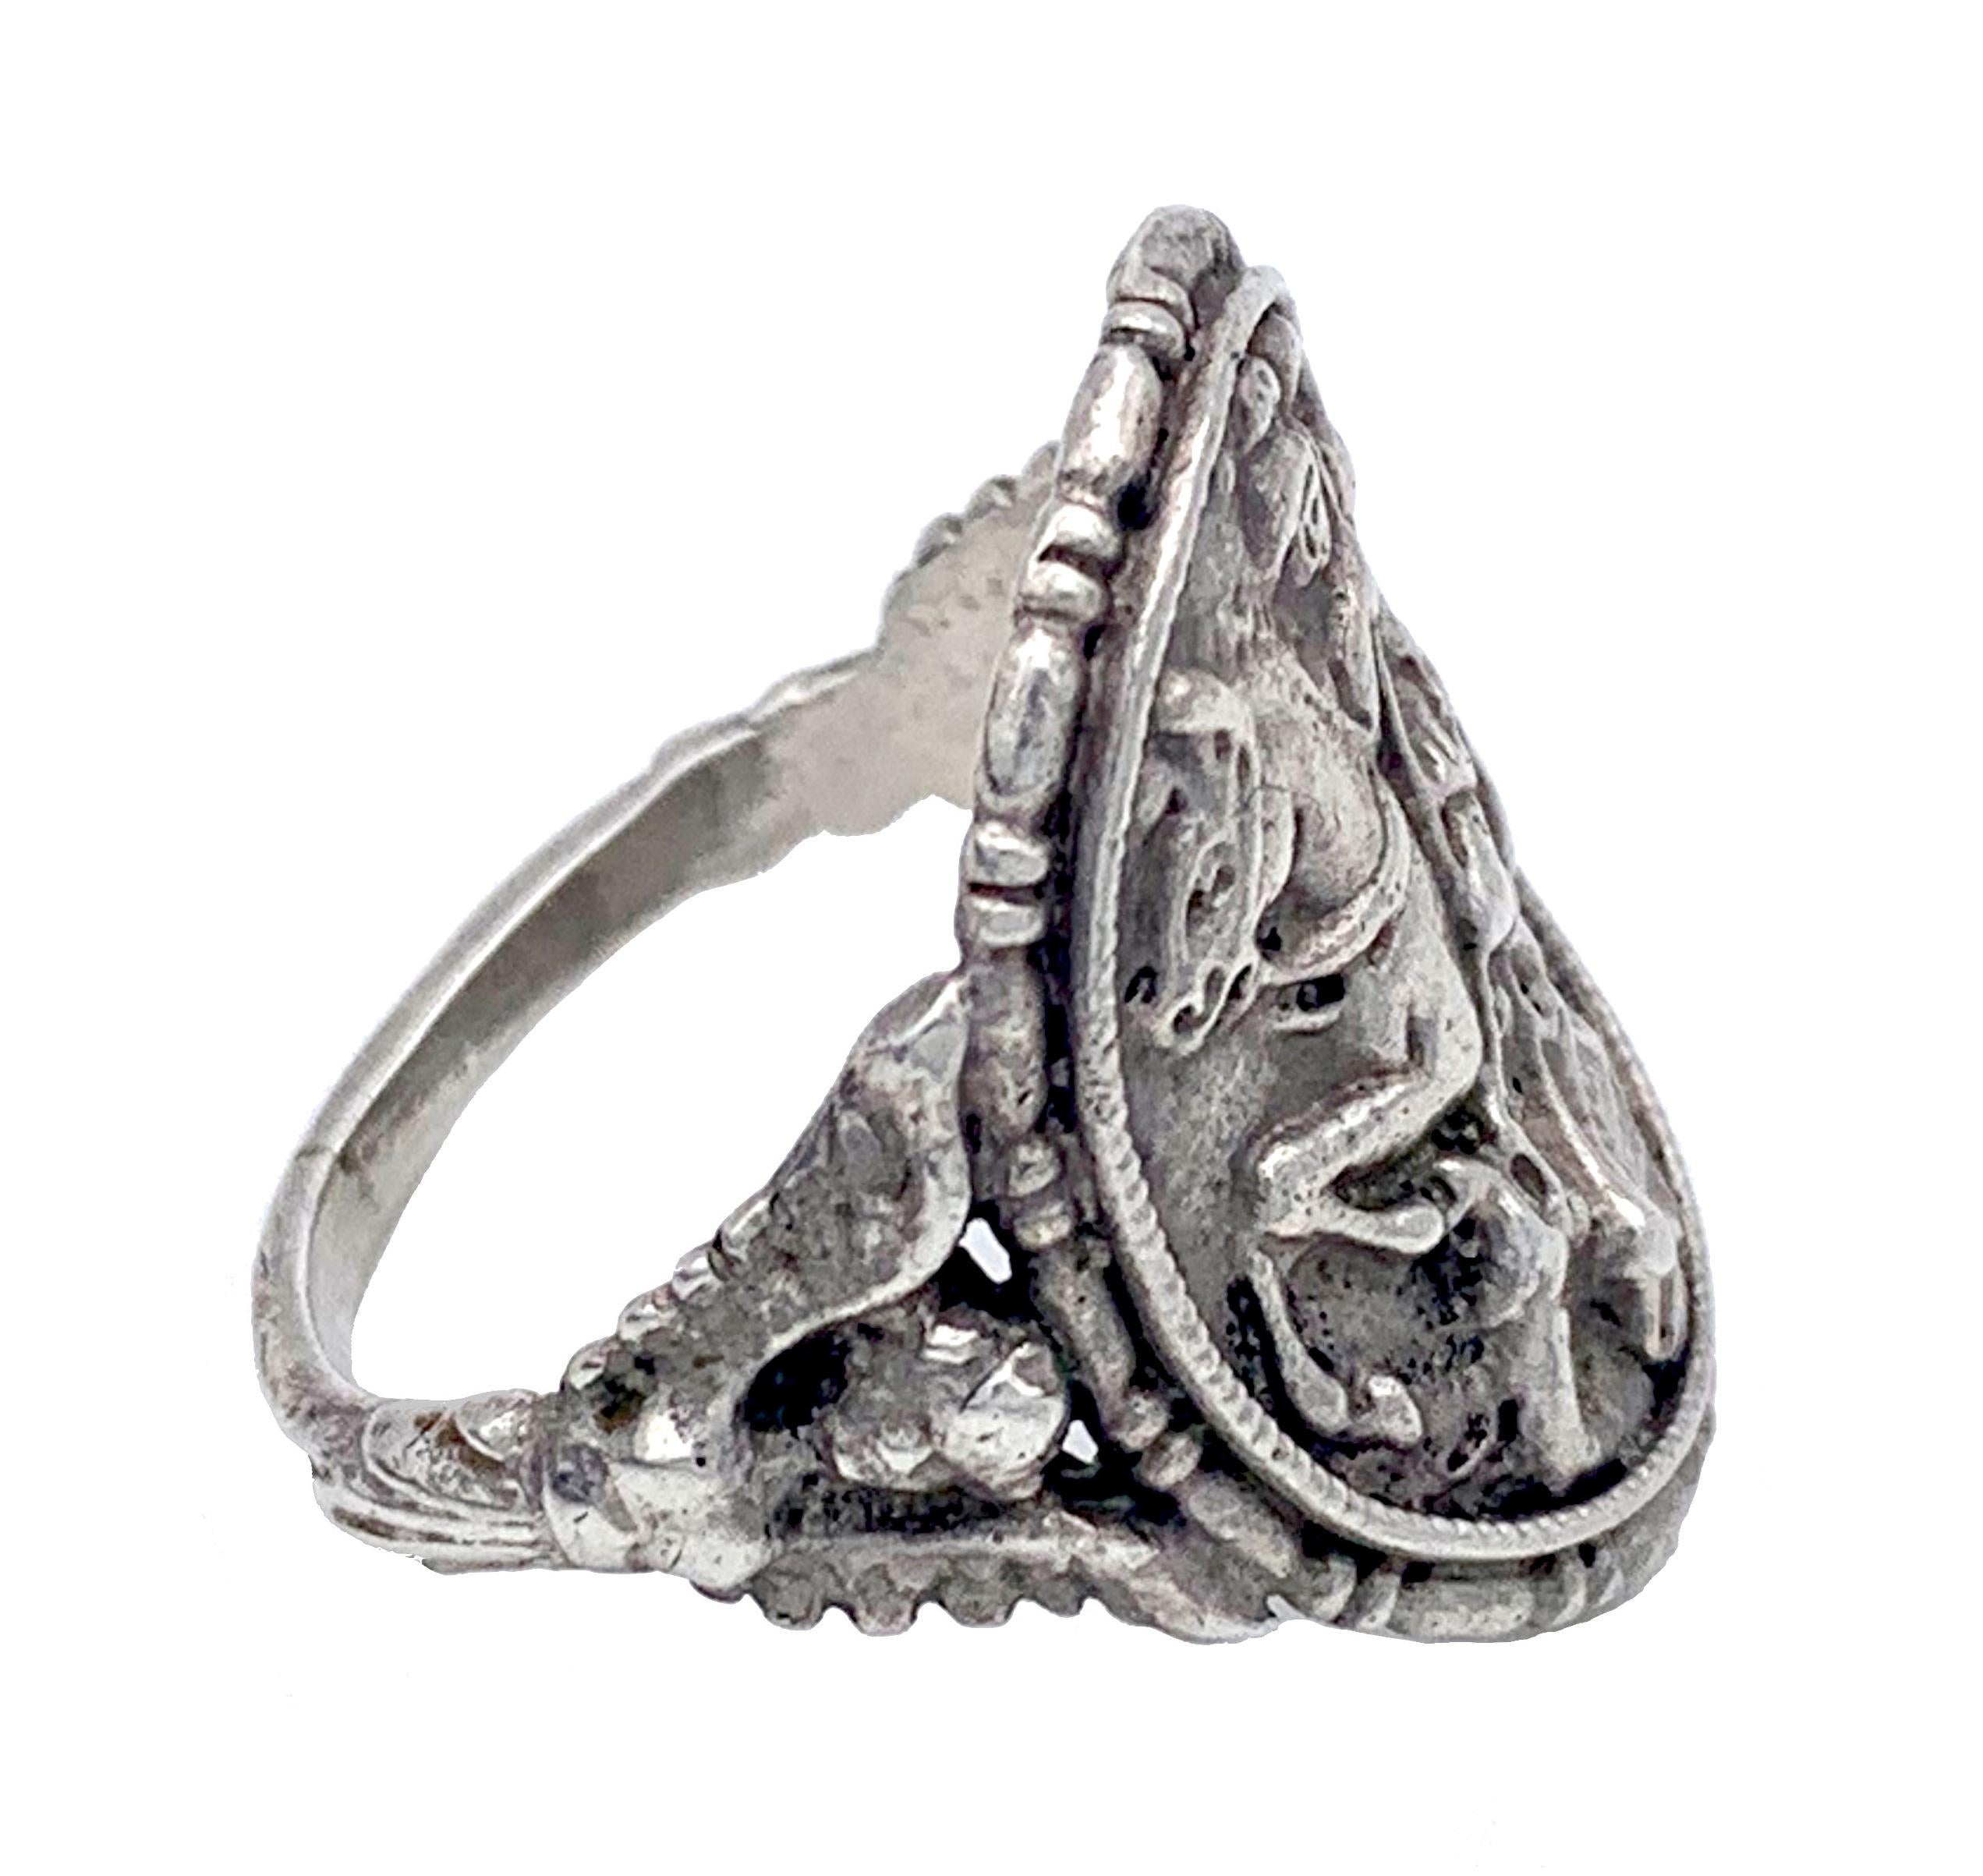 This  antique silver ring shows Saint George fighting the dragon on the curbed ring head  The reverse shows Saint Eustace kneeling in front of a dear.
The ring shoulders are designed as winged caryatids.
Ringsize 54